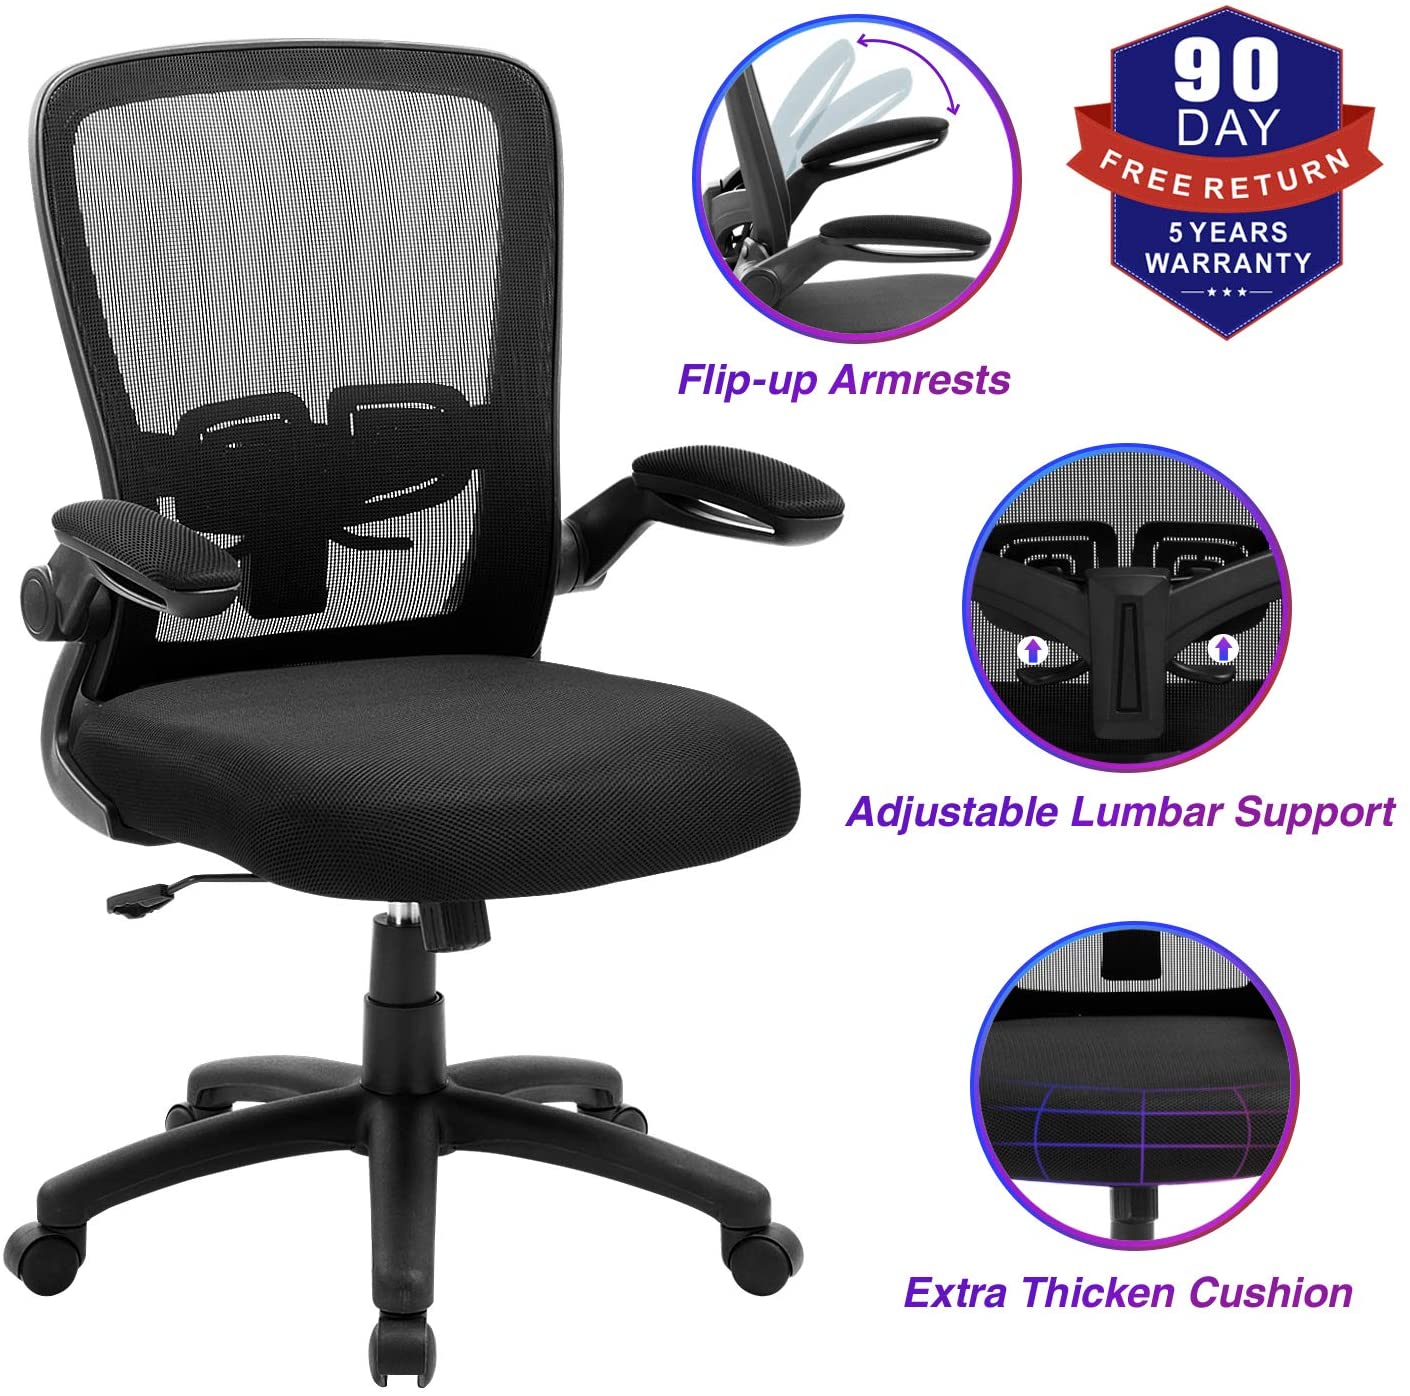 Office Chair, ZLHECTO Ergonomic Desk Chair with Adjustable Height and Lumbar Support, High Back Mesh Computer Chair with Flip up Armrests for Conference Room - 300lb Weight Capacity